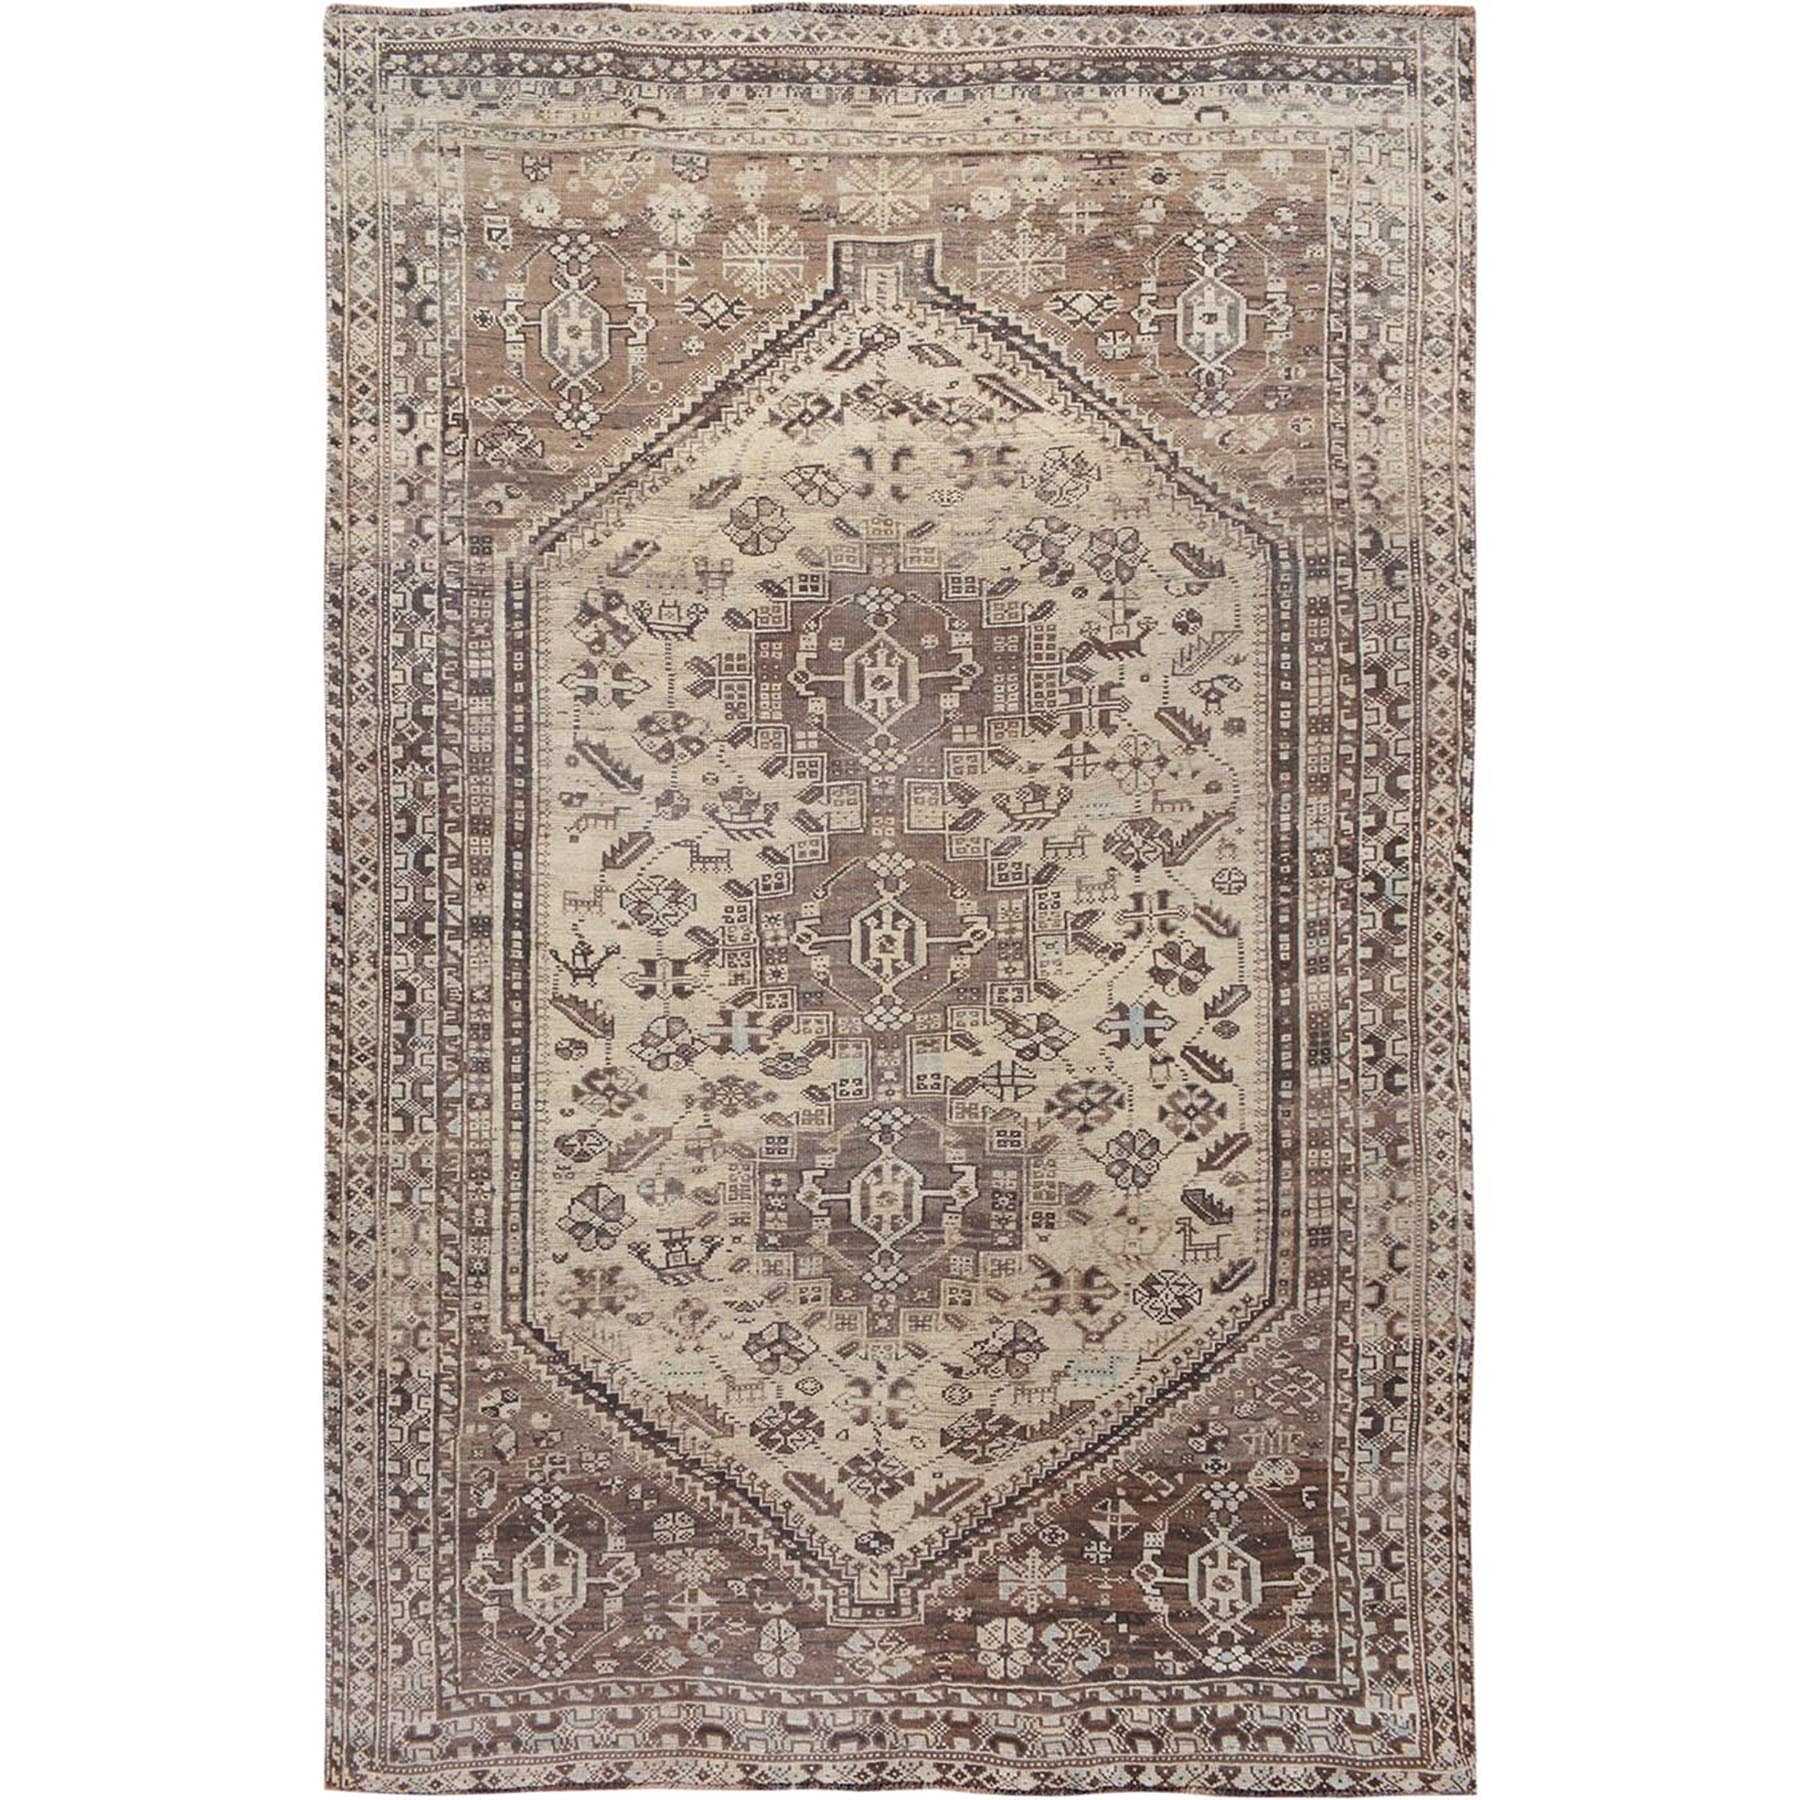 6'4"X8'10" Brown Old And Worn Down Persian Qashqai Pure Wool Hand Knotted Oriental Rug moae7bce